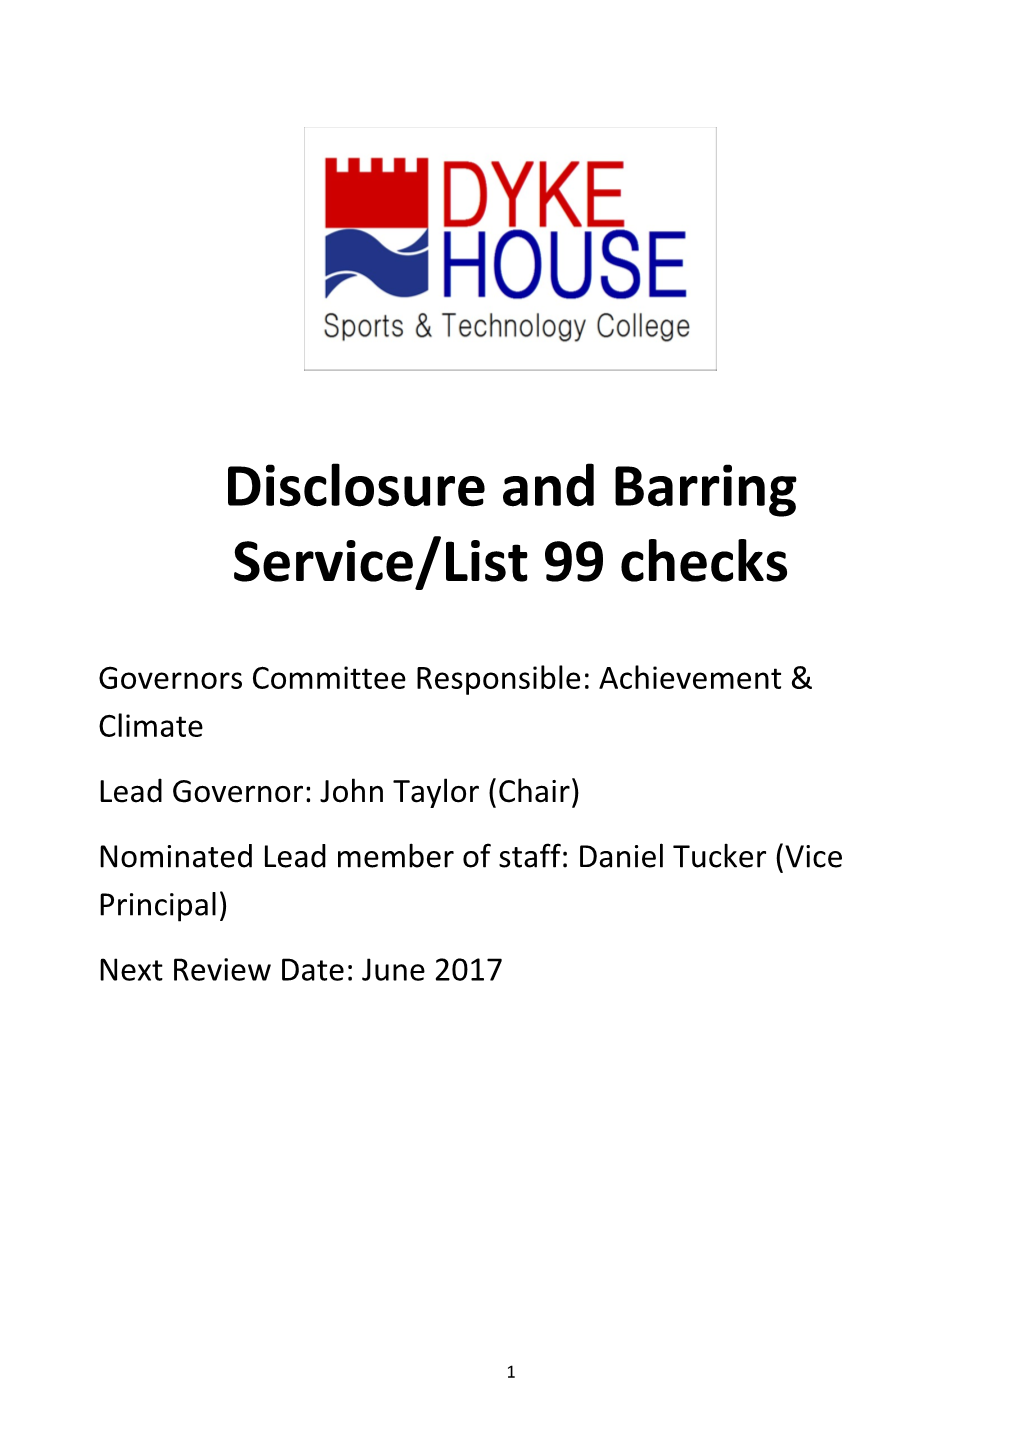 Disclosure and Barring Service/List 99 Checks